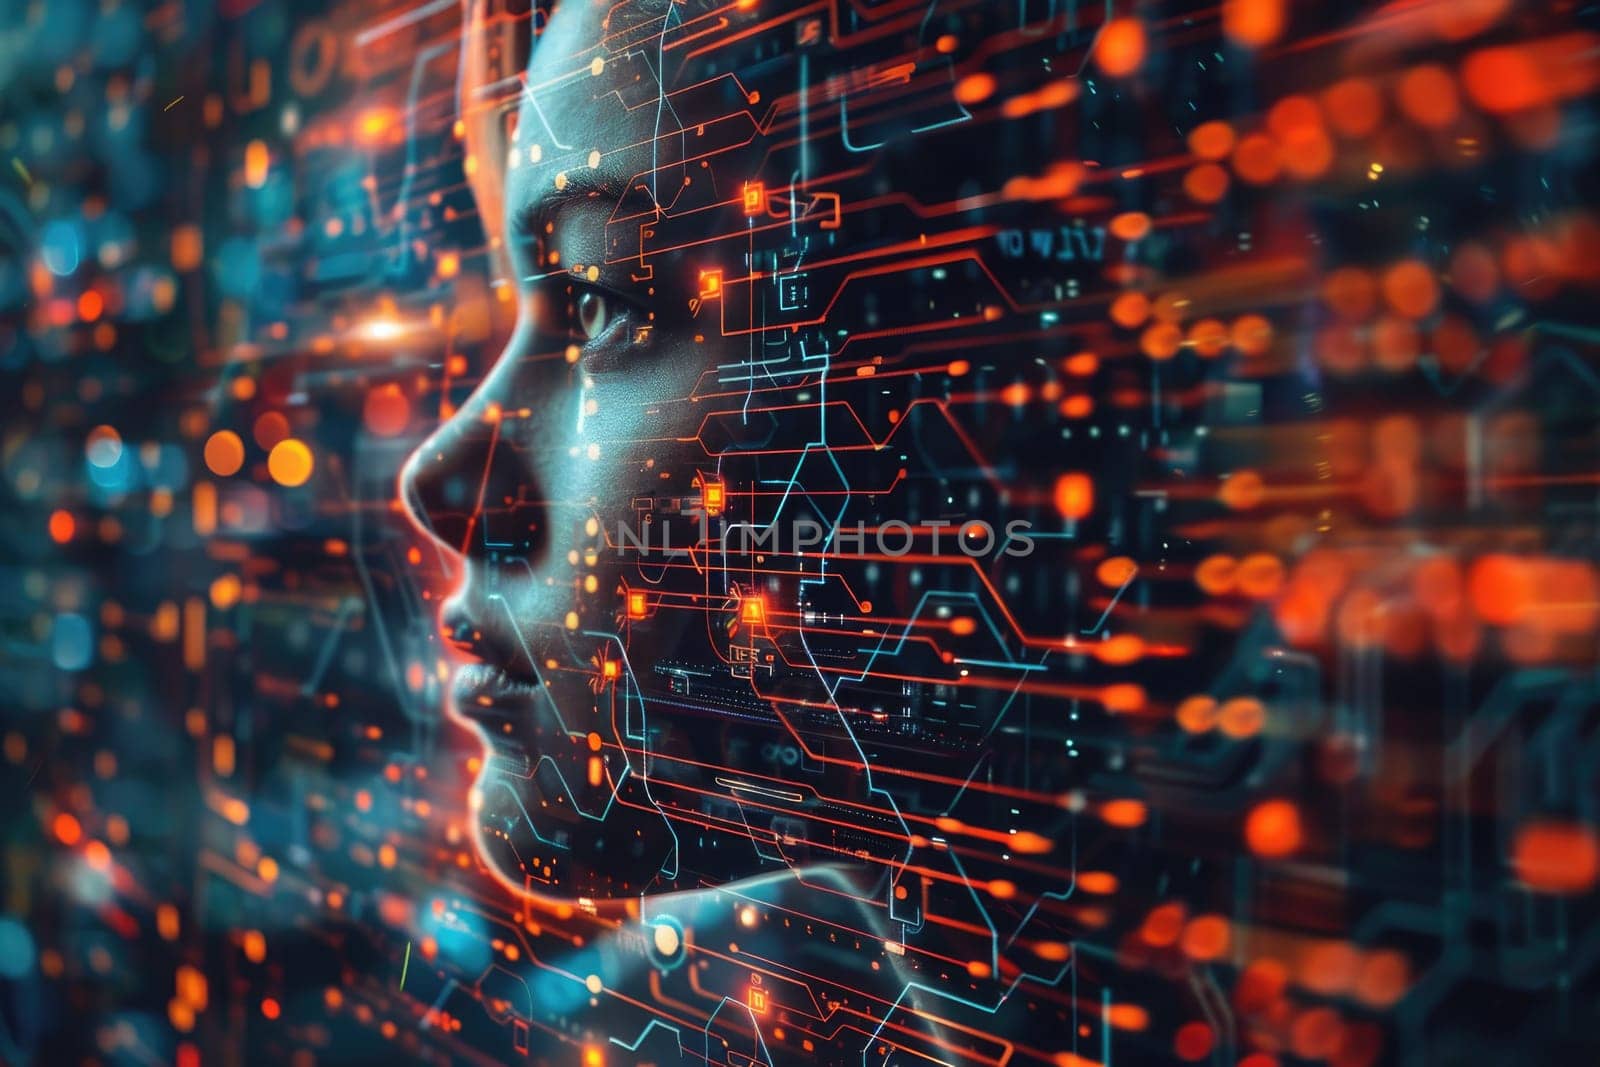 A woman's face is shown in a computer generated image with a lot of orange and blue colors. The image is abstract and has a futuristic feel to it